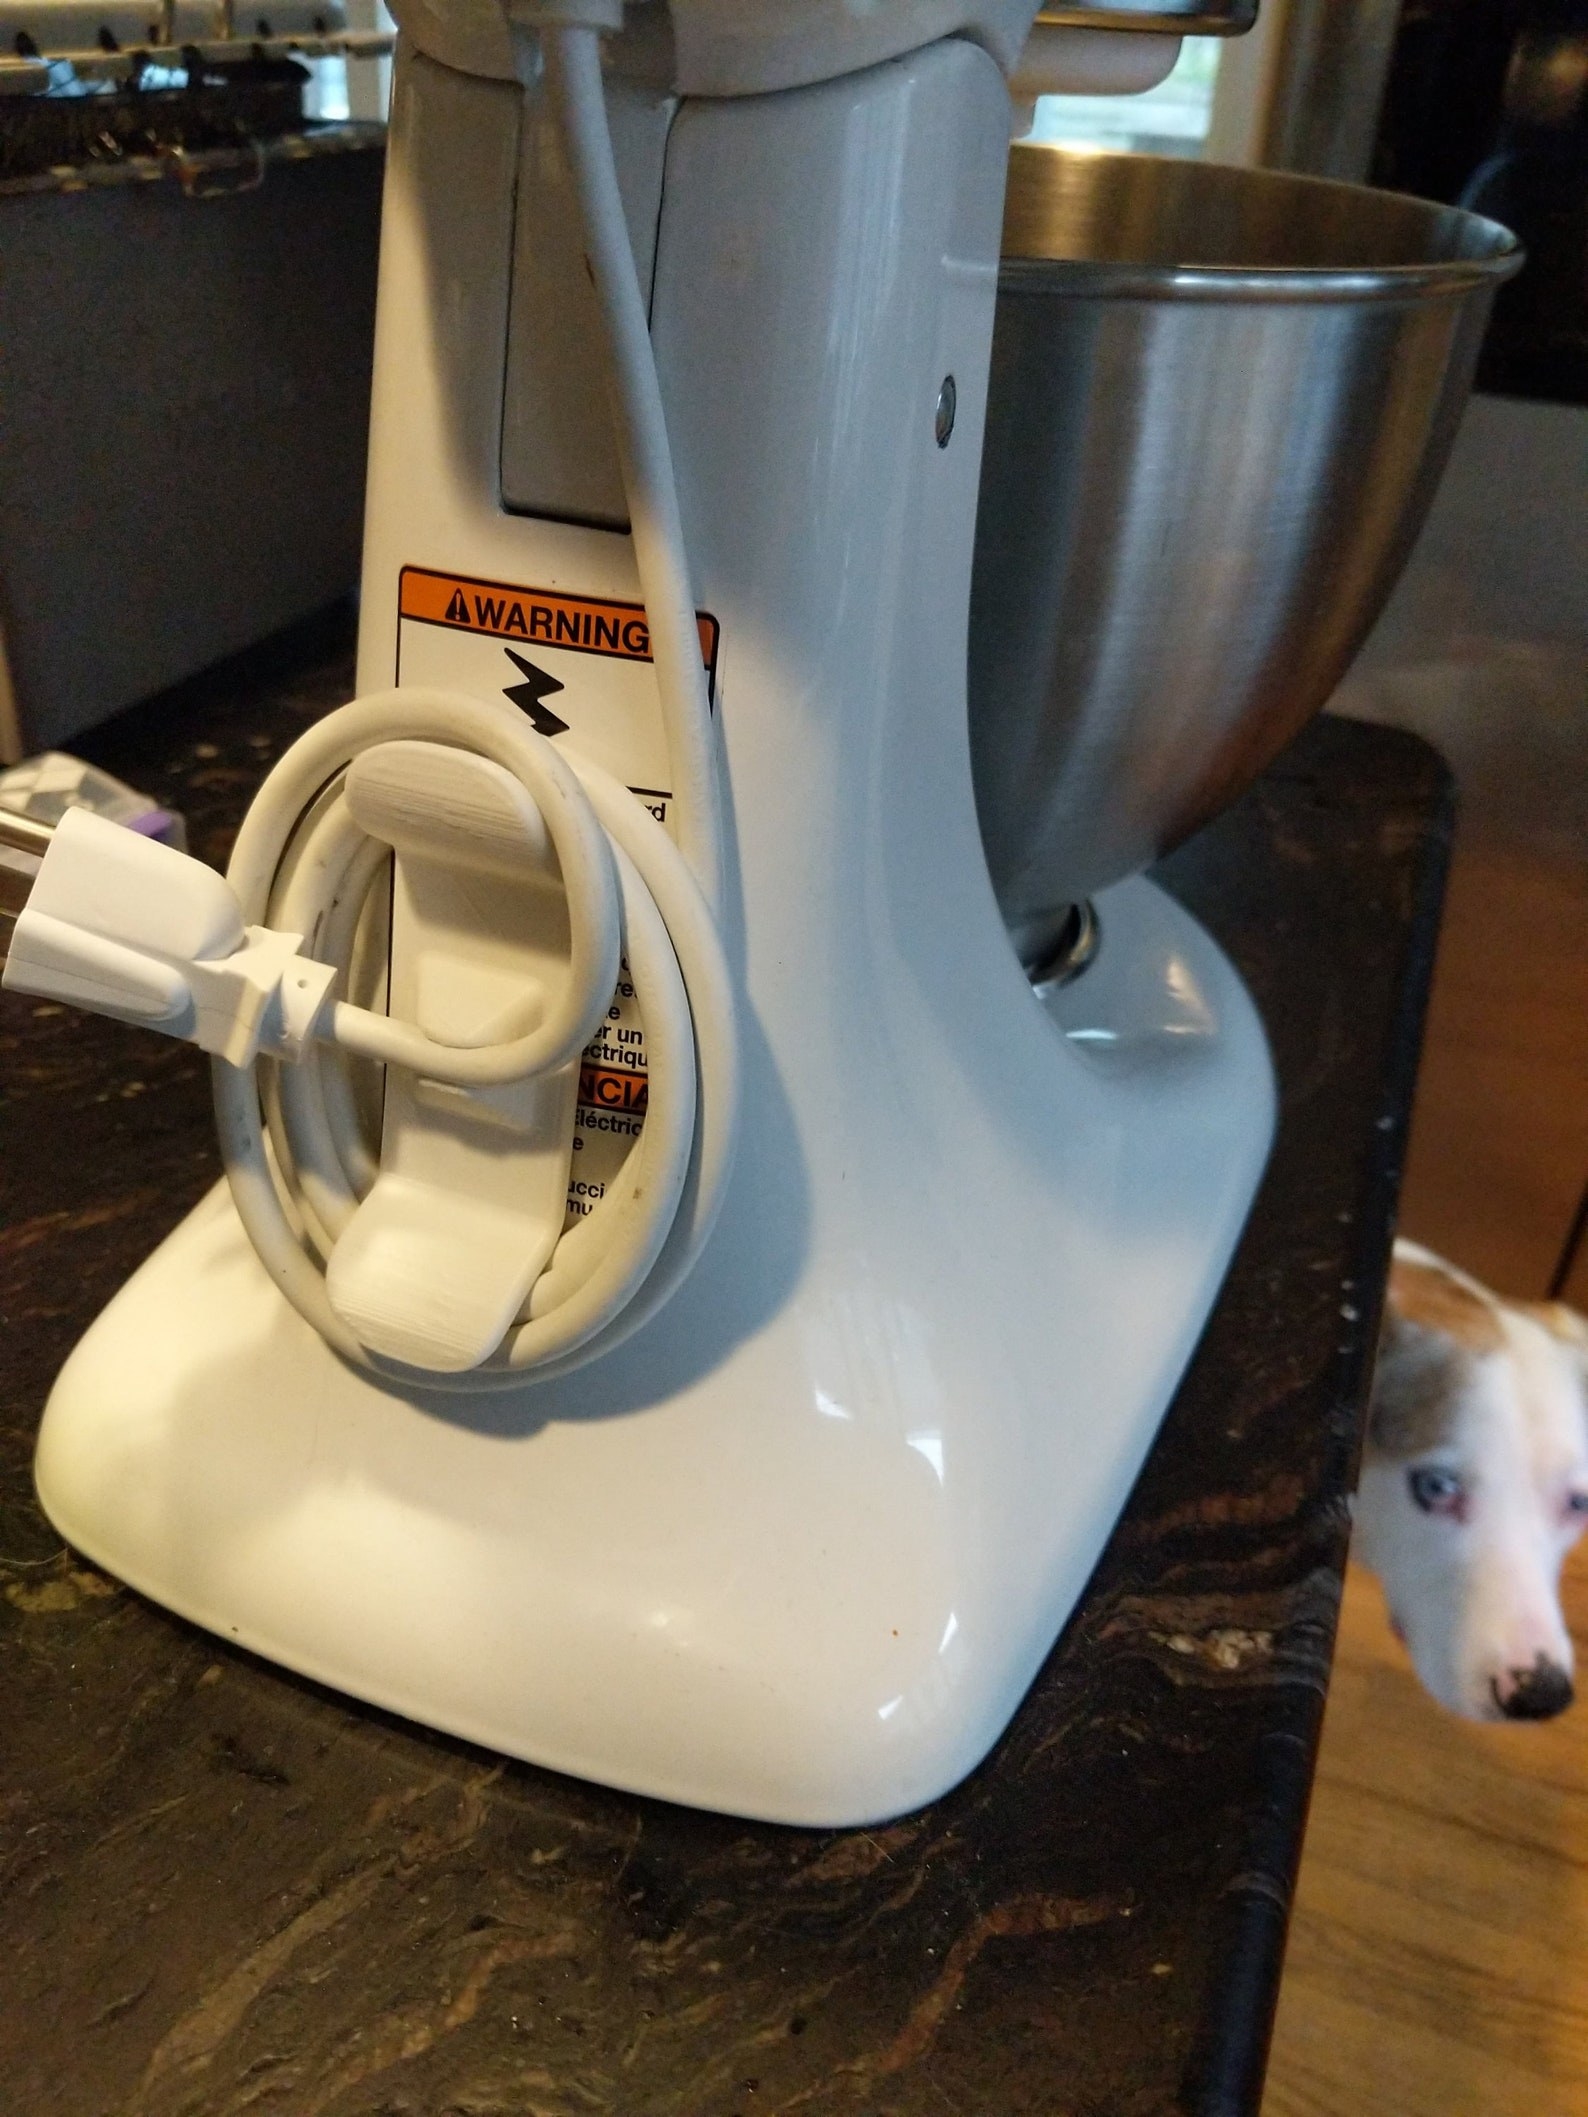 kitchenaid mixer with cable wrap attached